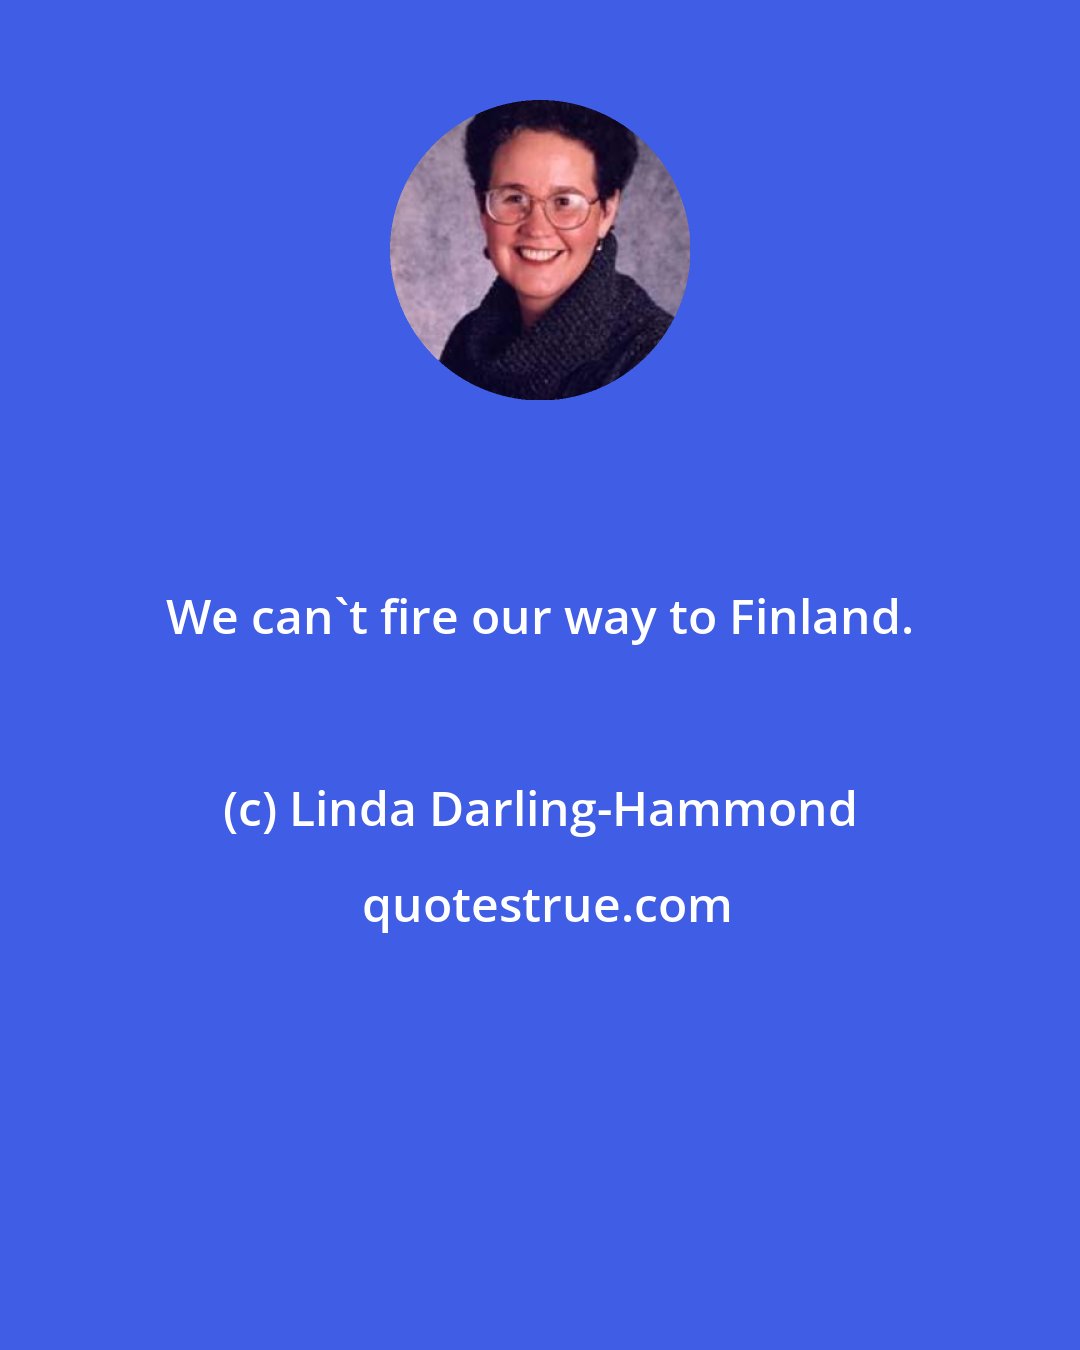 Linda Darling-Hammond: We can't fire our way to Finland.